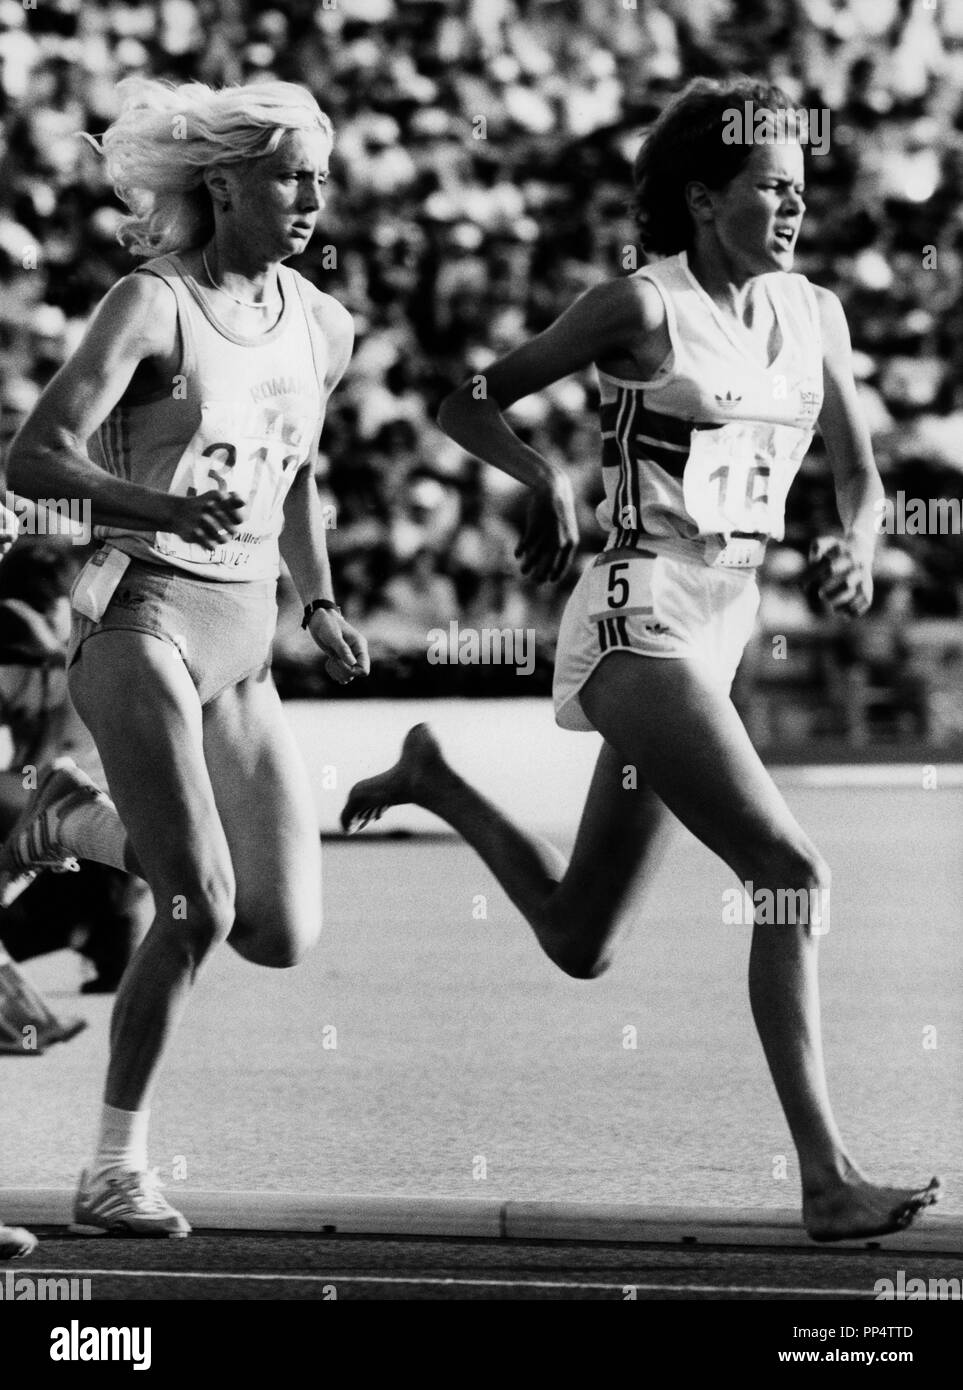 ZOLA BUDD track and field athlete born in South Africa compete for Great Britain in Olympics summer game Los Angeles 1984 leads the 3000m run before   Stock Photo